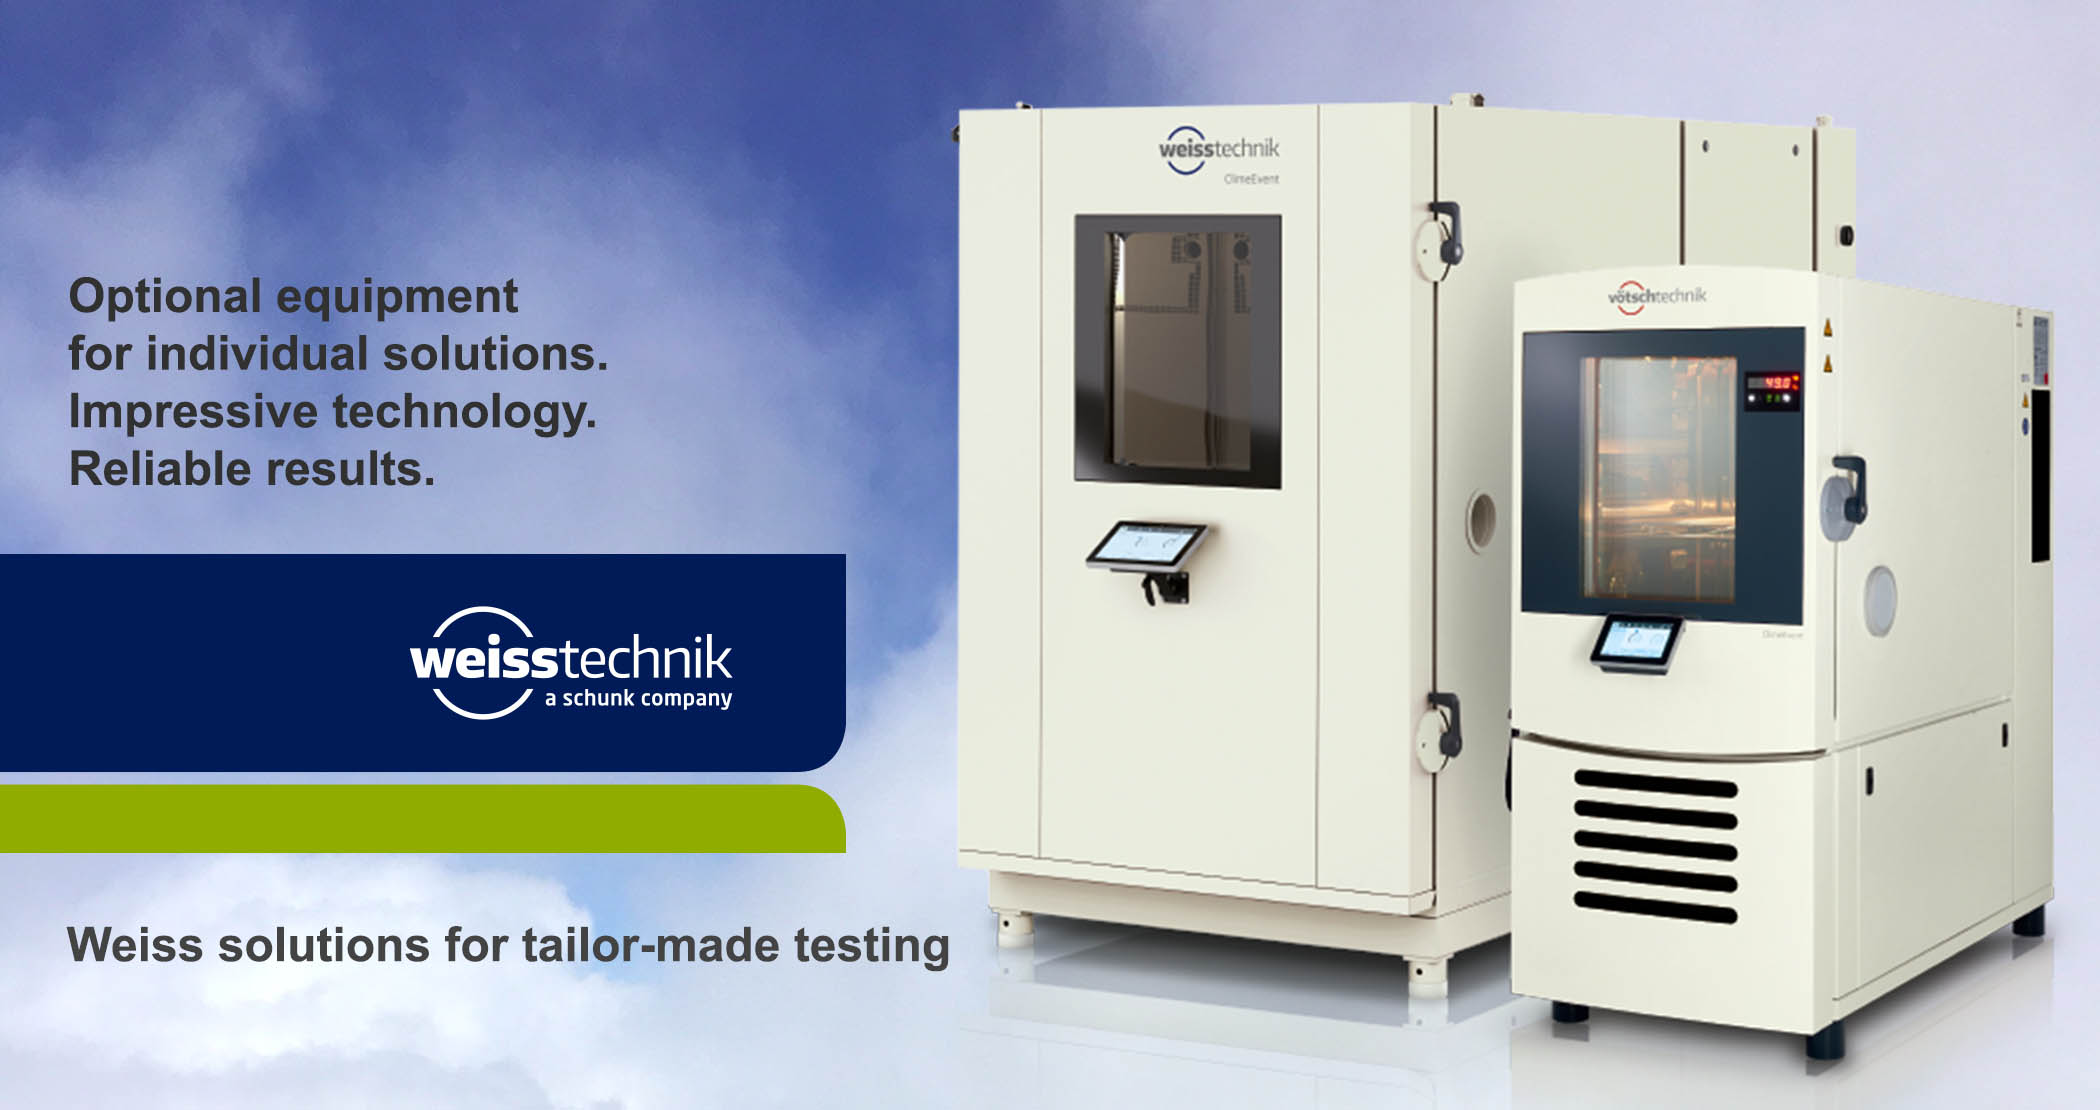 Weiss solutions for tailor-made testing